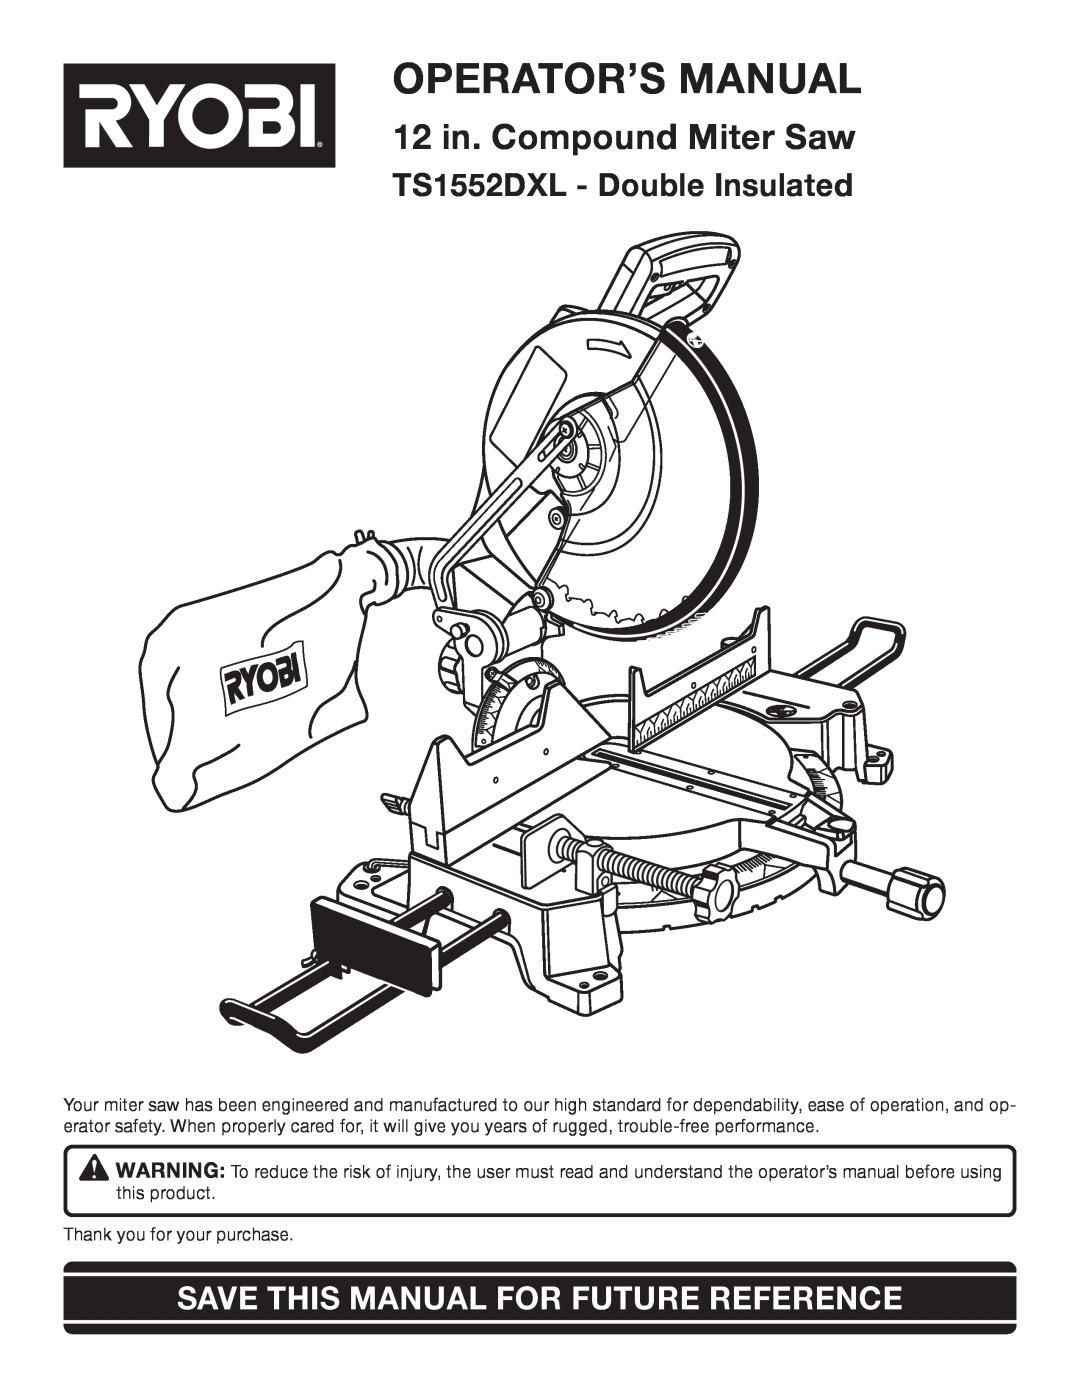 Ryobi manual Operator’S Manual, 12 in. Compound Miter Saw, TS1552DXL - Double Insulated 